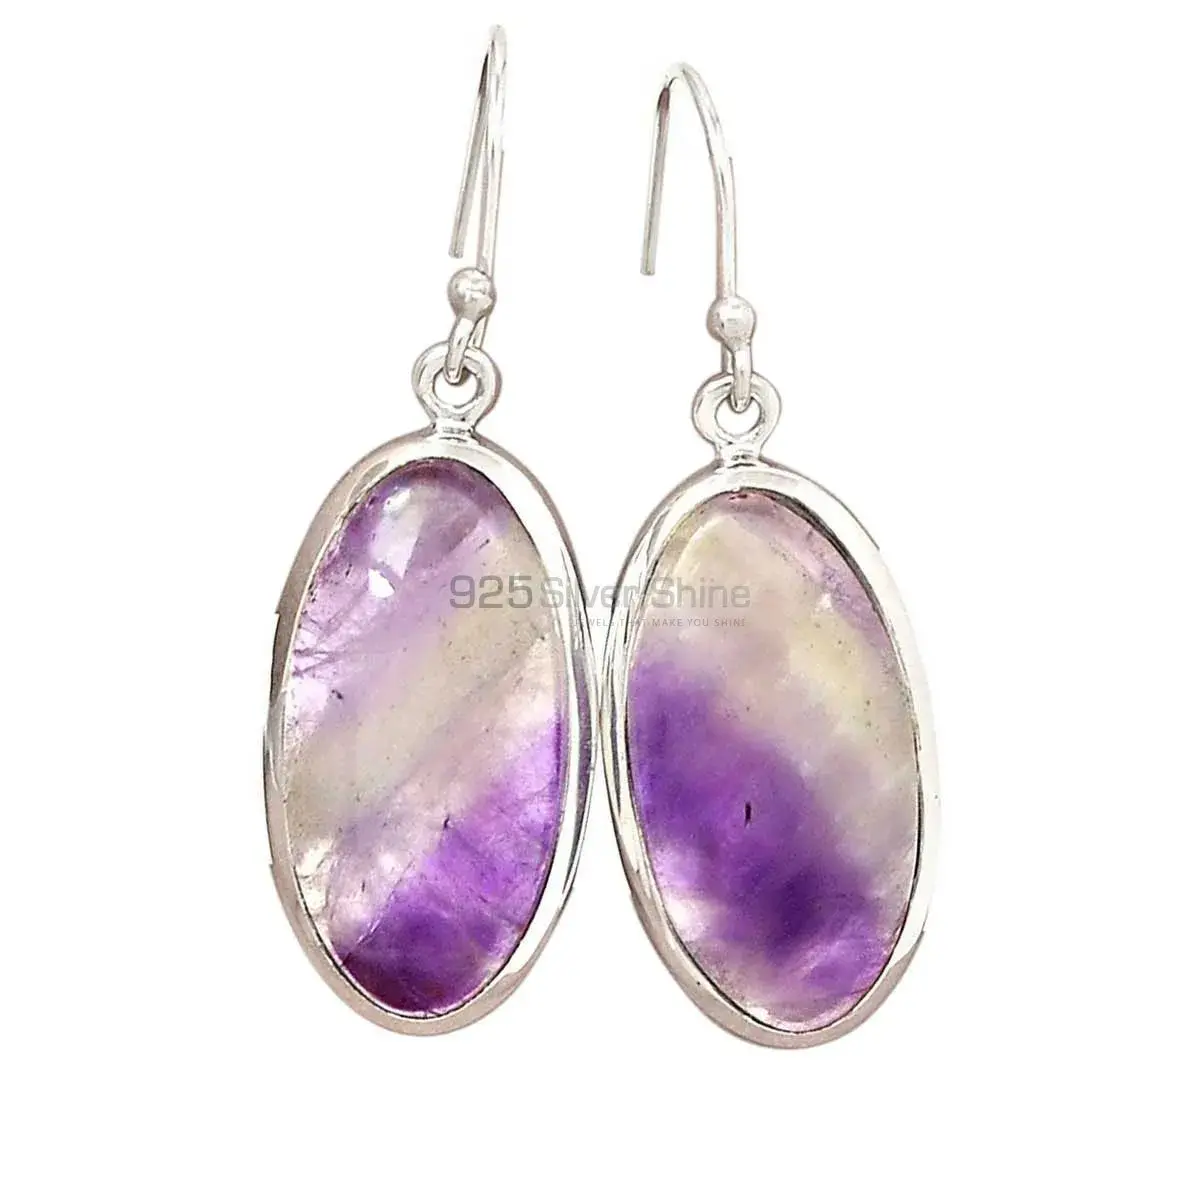 Inexpensive 925 Sterling Silver Earrings Wholesaler In Amethyst Lace agate Gemstone Jewelry 925SE2705